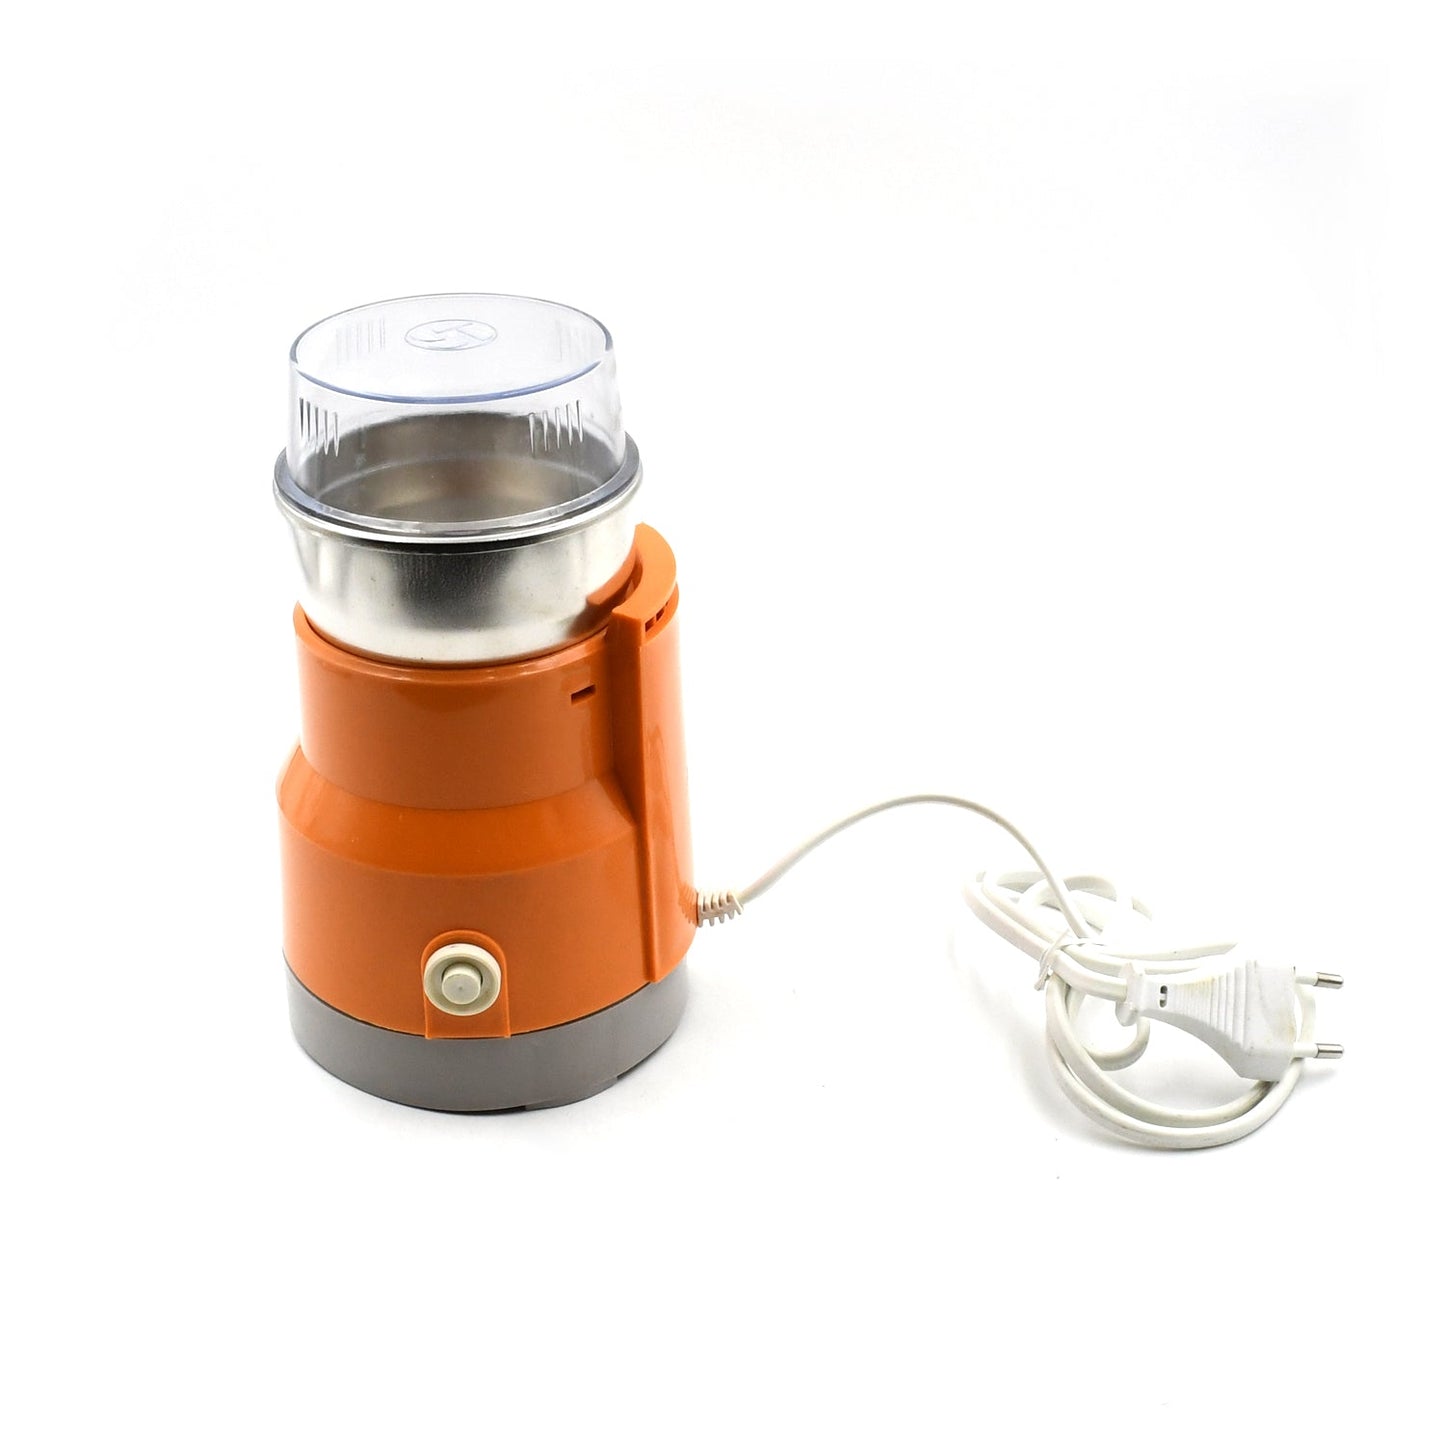 Multi Function Small Food Grinder Grain Grinder, Portable Coffee Bean Seasonings Spices Mill Powder Machine Small Kitchen Appliances for Home and Office